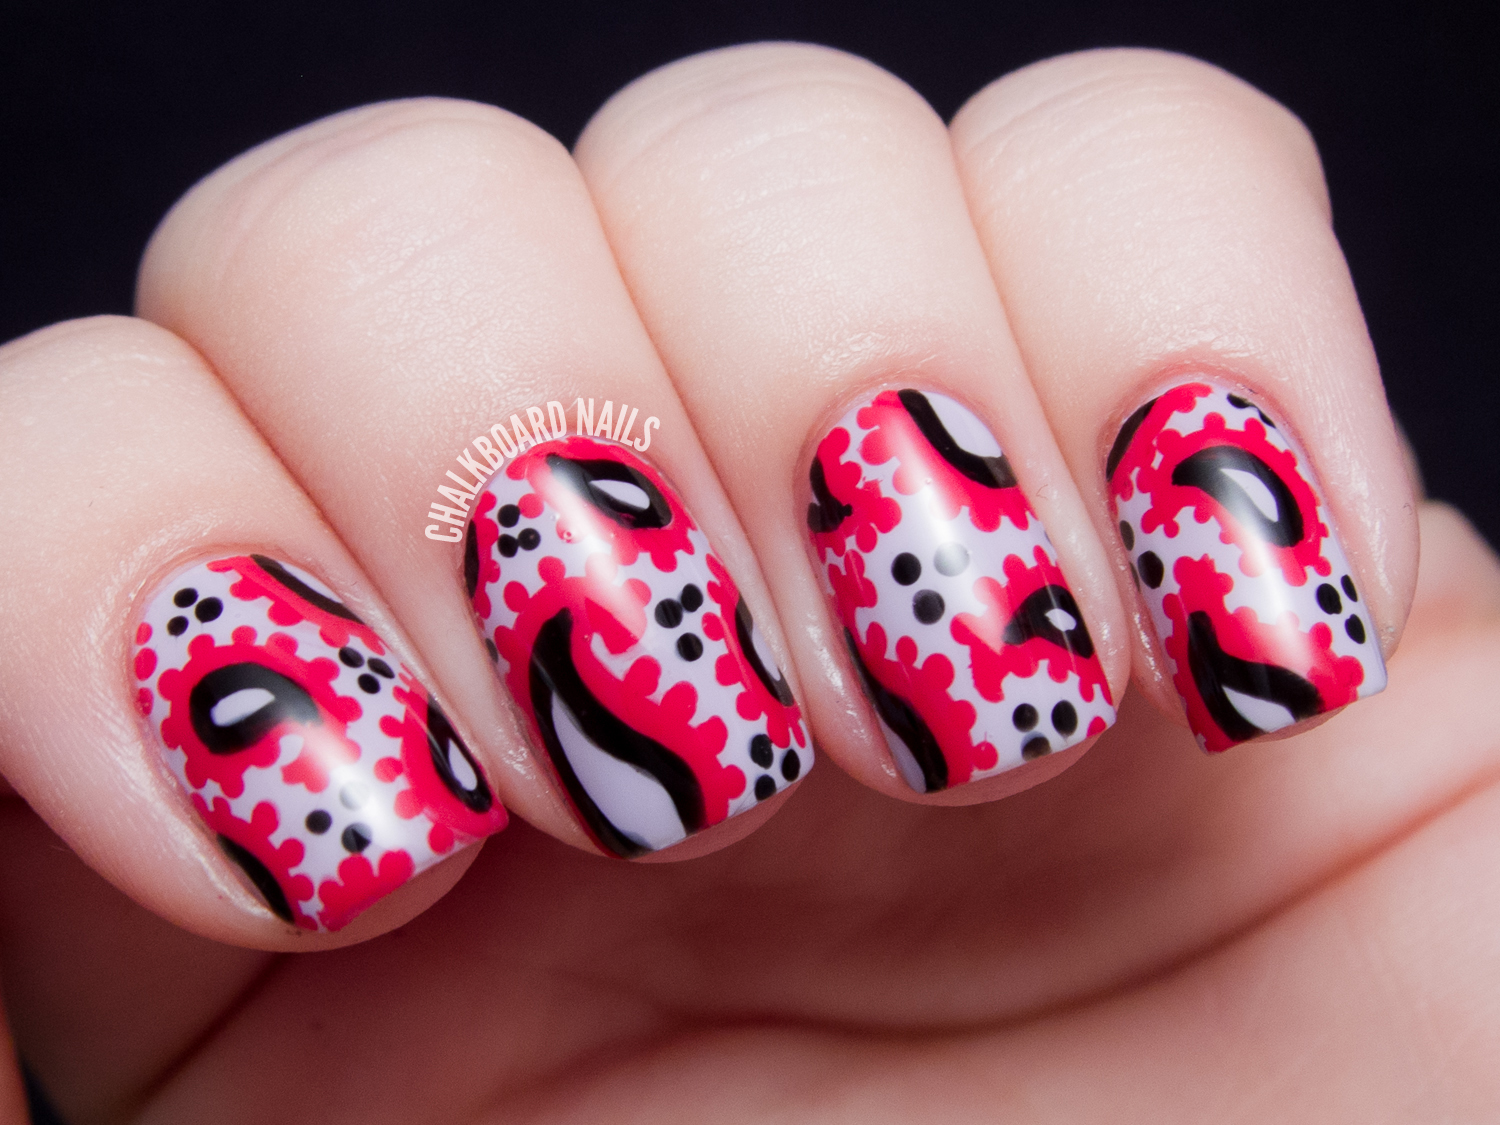 My patterned nails from 2011! 